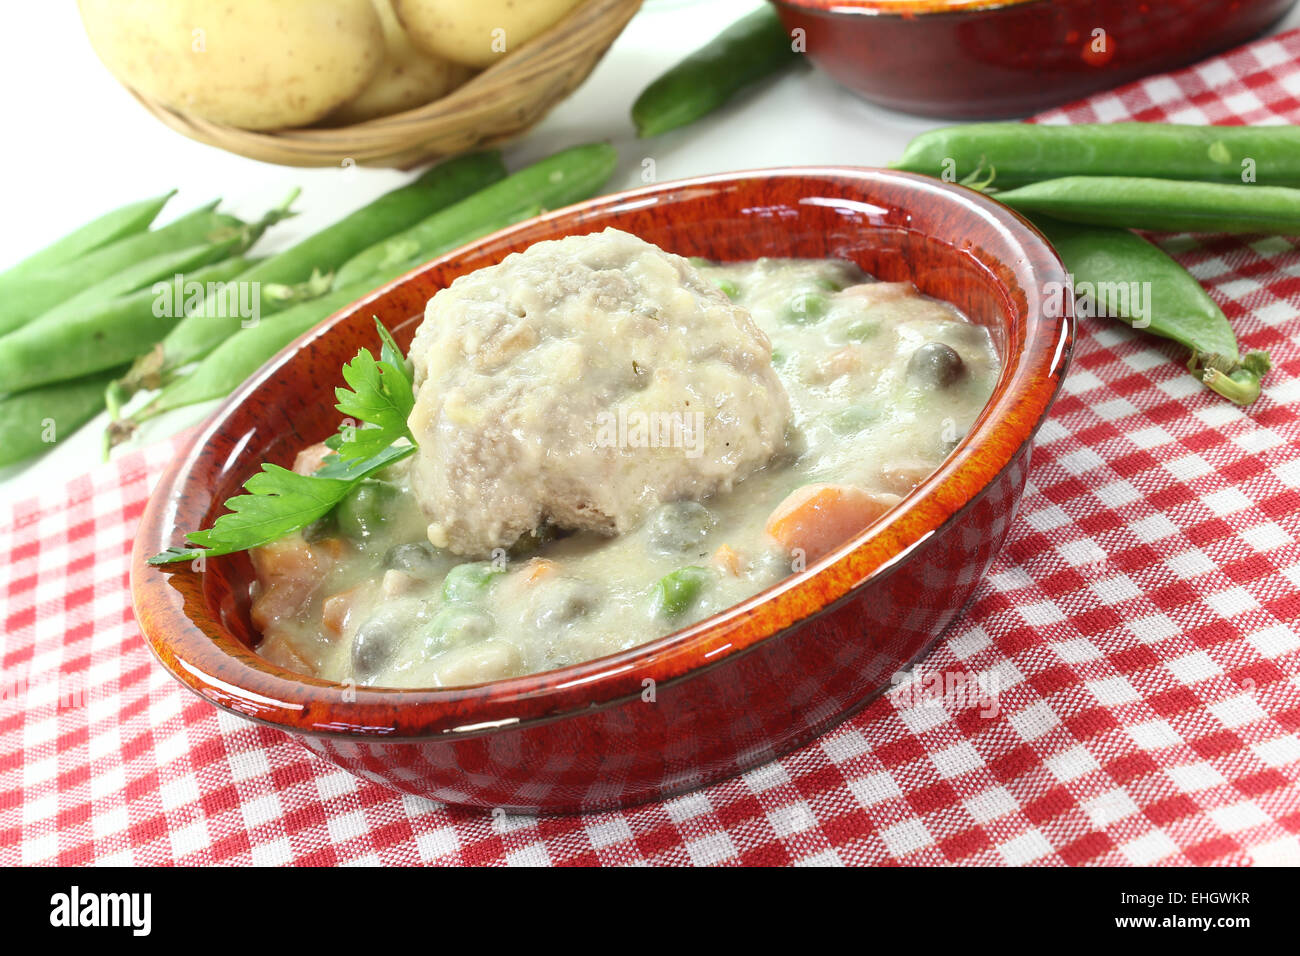 fresh cooked meatballs in a white sauce Stock Photo